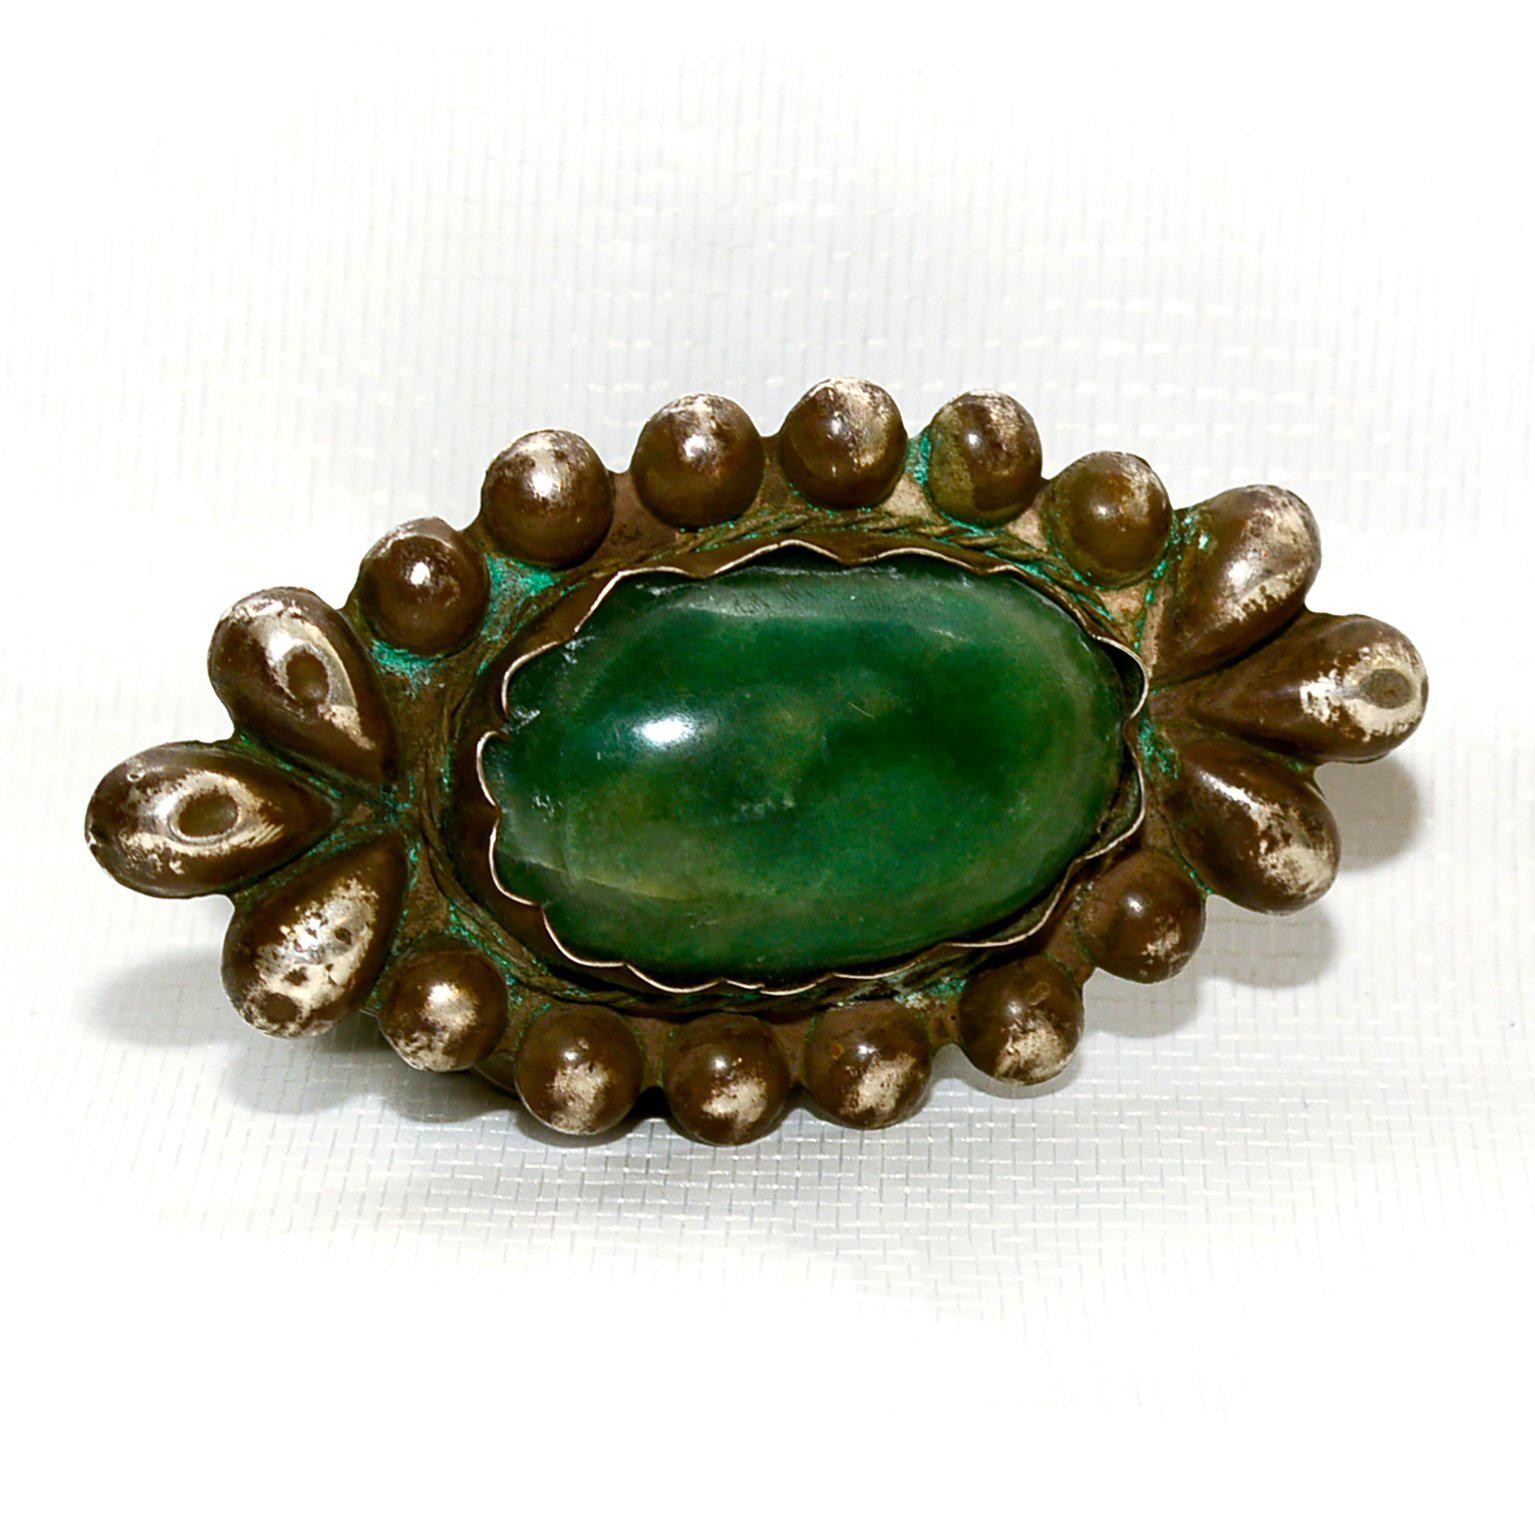 Rare William Spratling Brooch Sterling Silver with Mexican Cabochon Jade 5